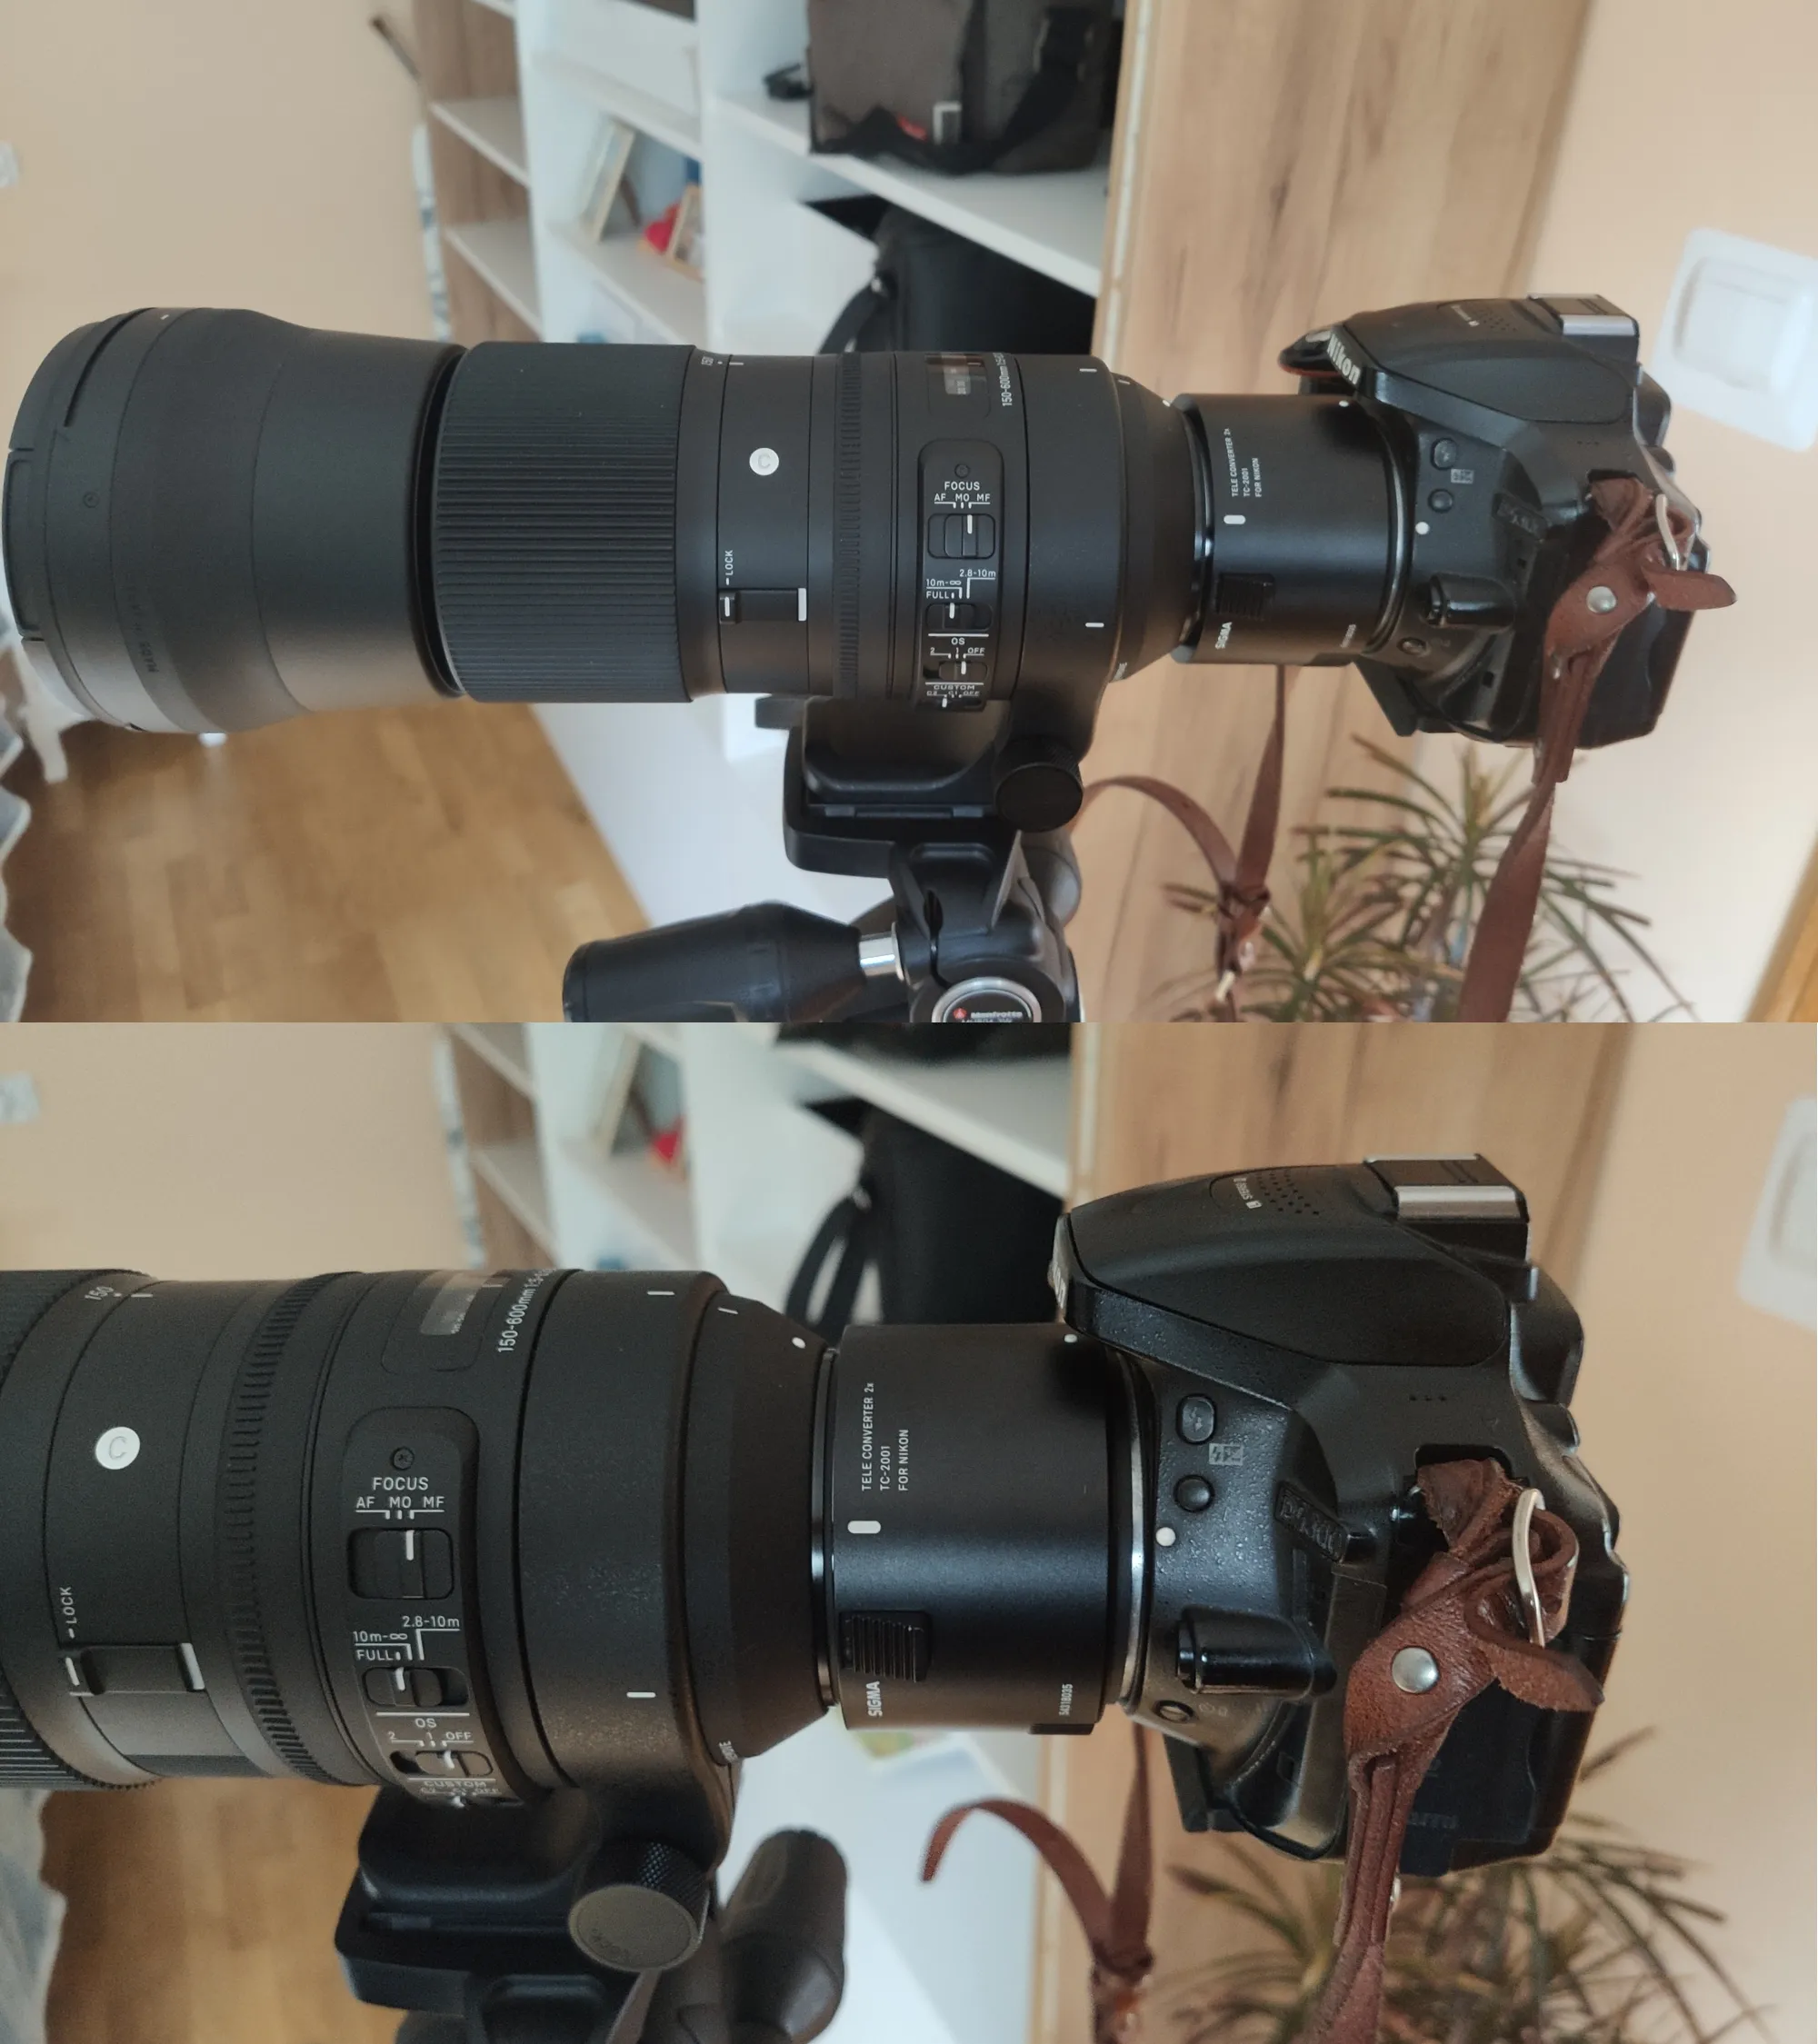 Teleconverter TC-2001 attached to Sigma 150-600mm f/5 - 6.3 Contemporary and Nikon D5300